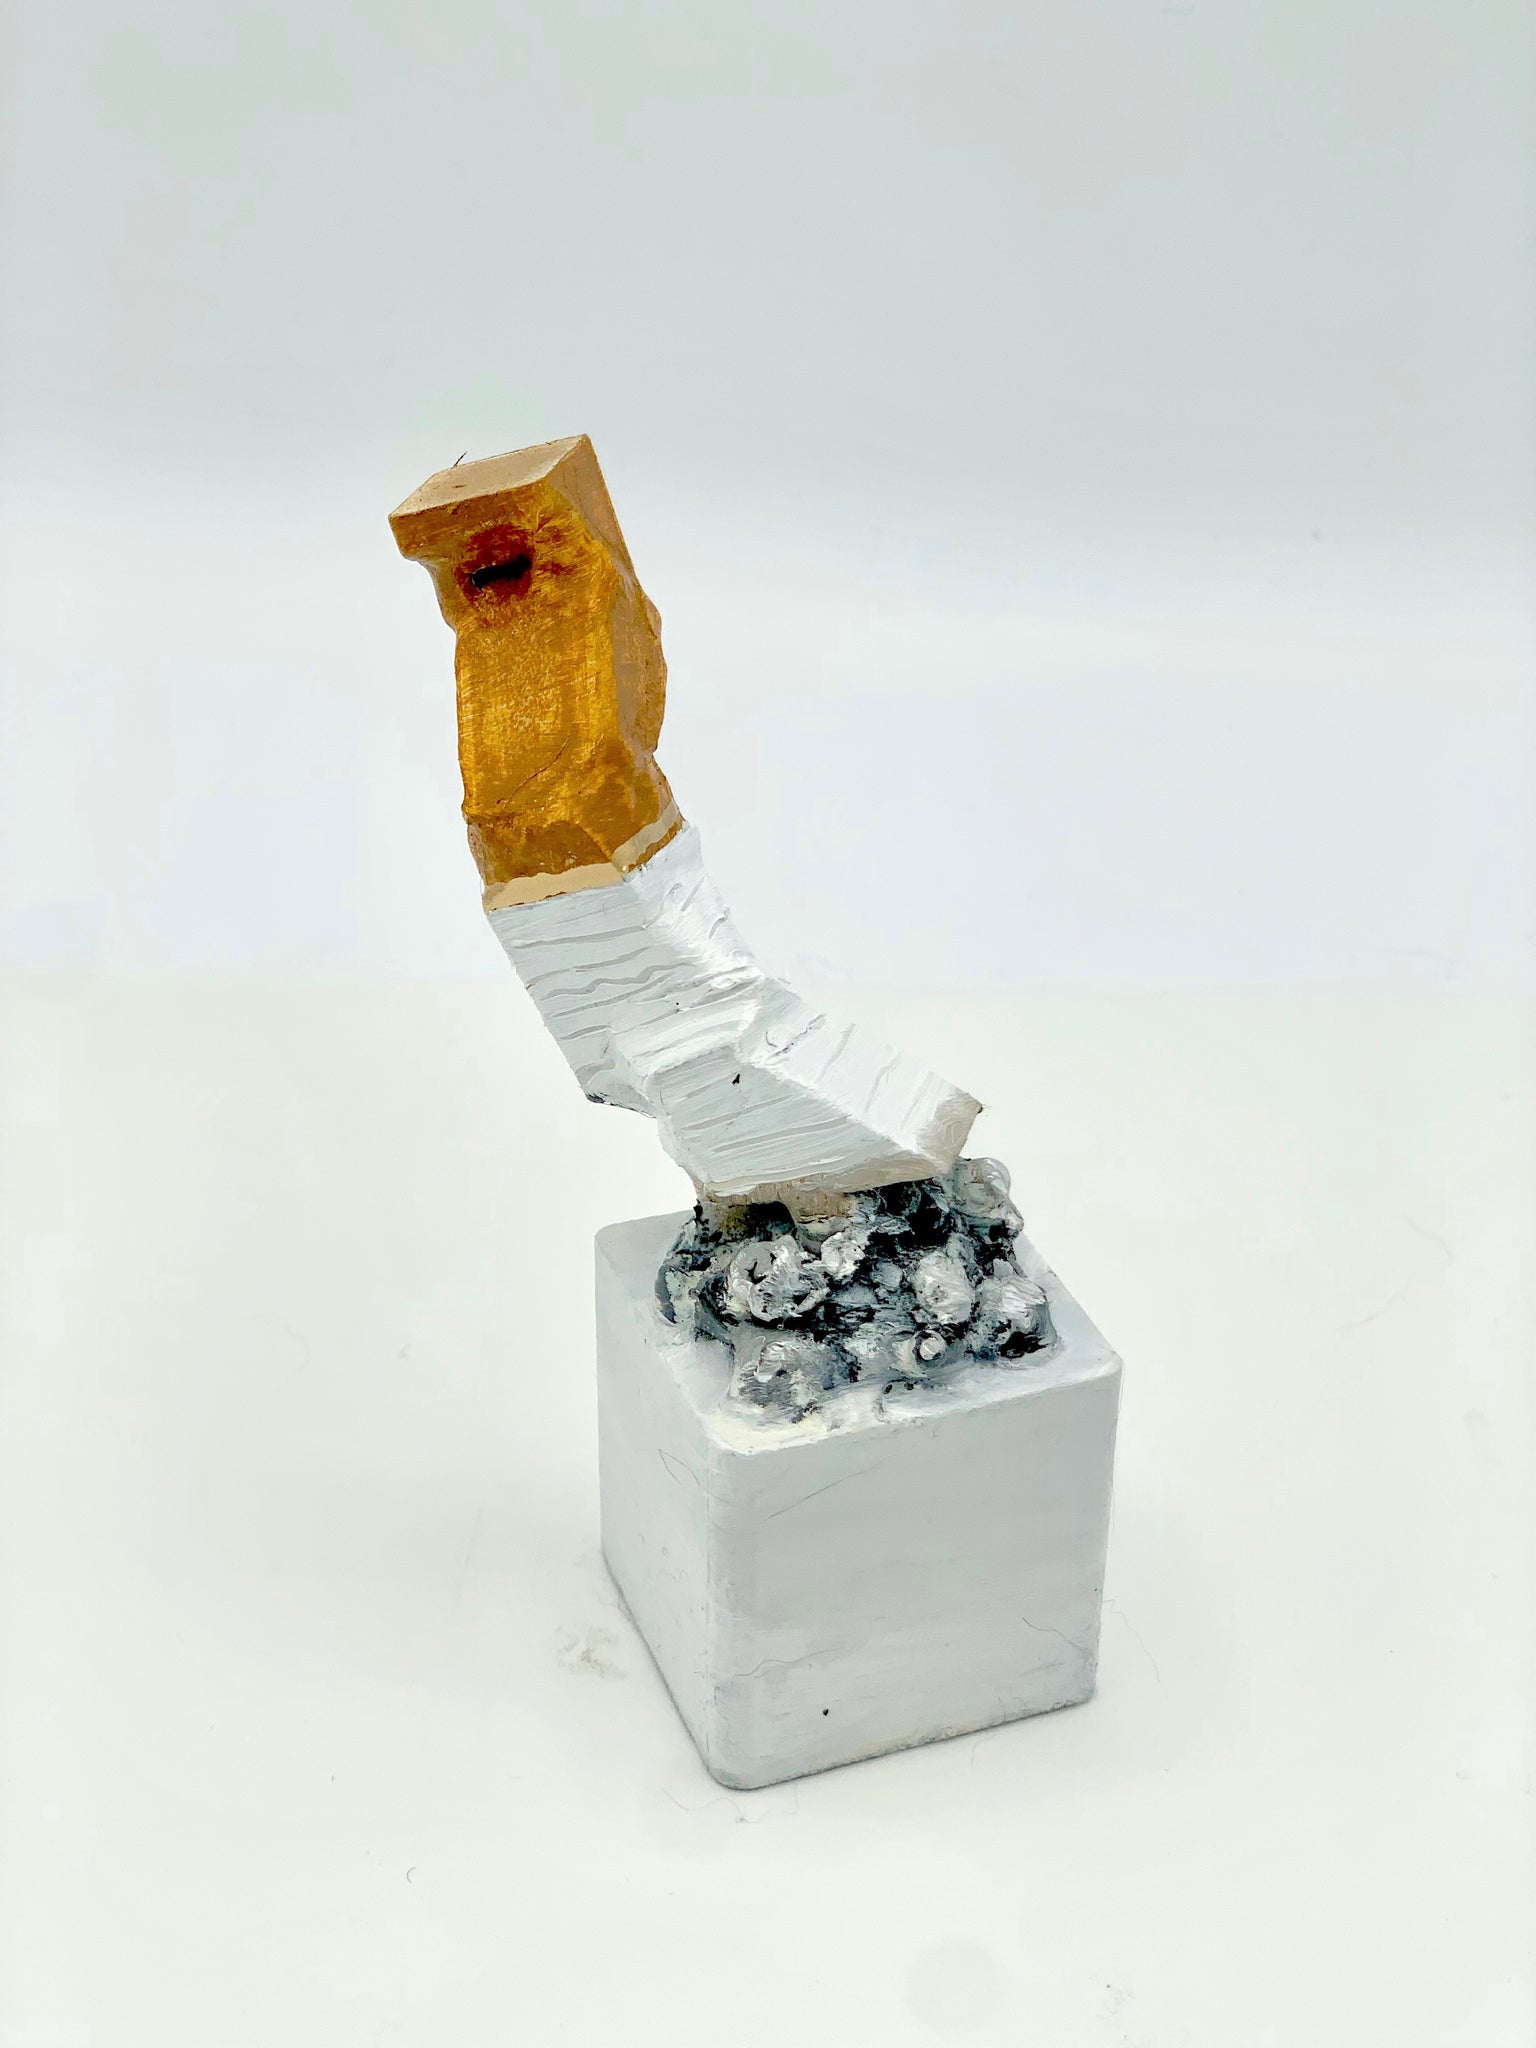 Mary Gagler, "Cubed Stubbed Cig (small)"